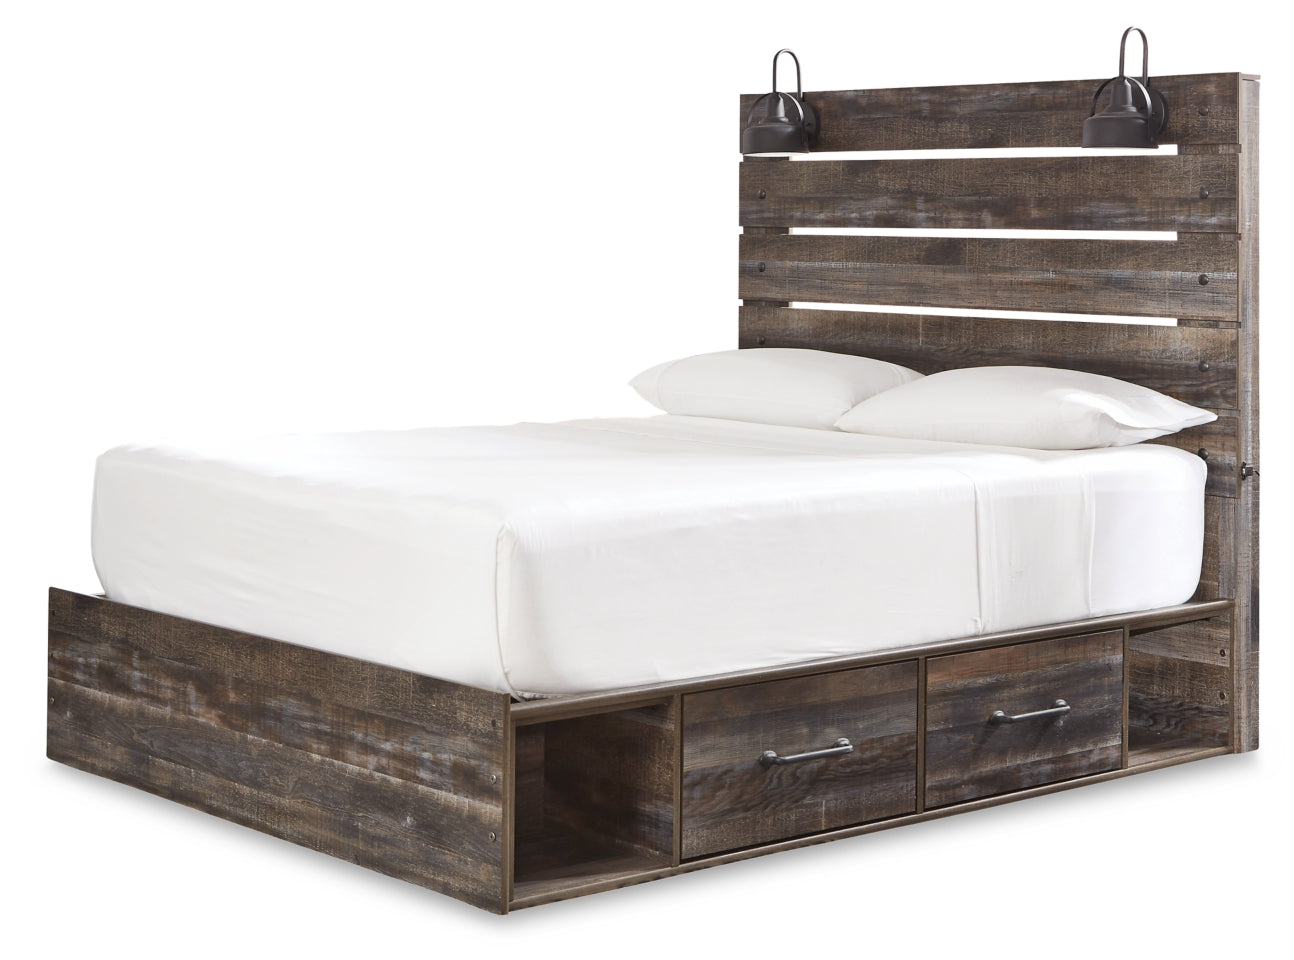 Drystan Queen Panel Bed with 2 Storage Drawers with Mirrored Dresser and 2 Nightstands - PKG003169 - furniture place usa